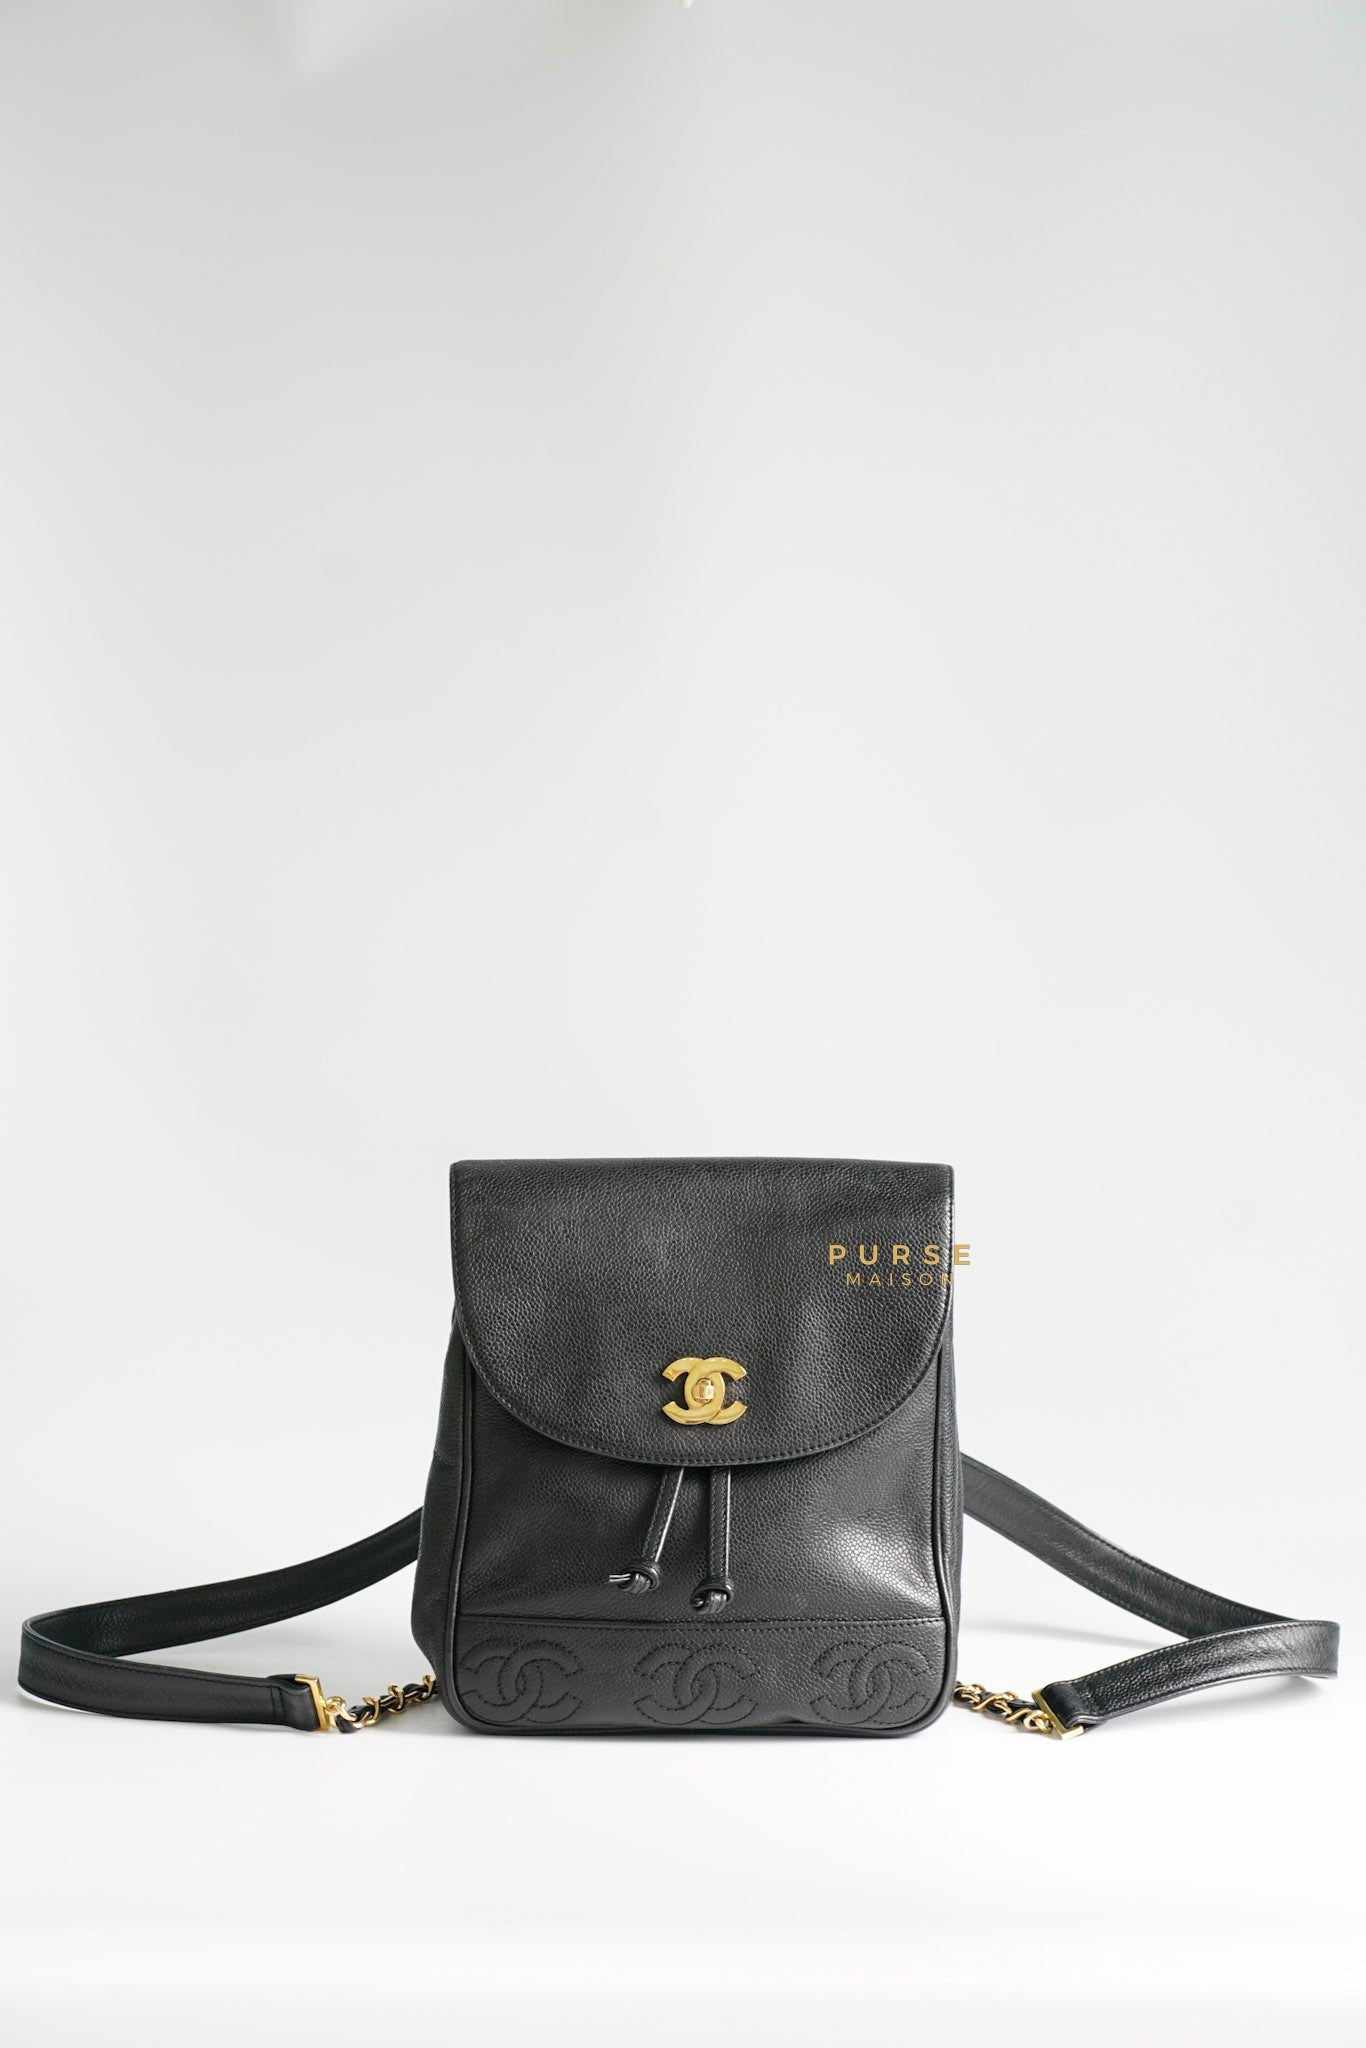 Chanel Vintage Triple CC Backpack in Black Caviar Leather and 24k Gold Hardware (Series 4)